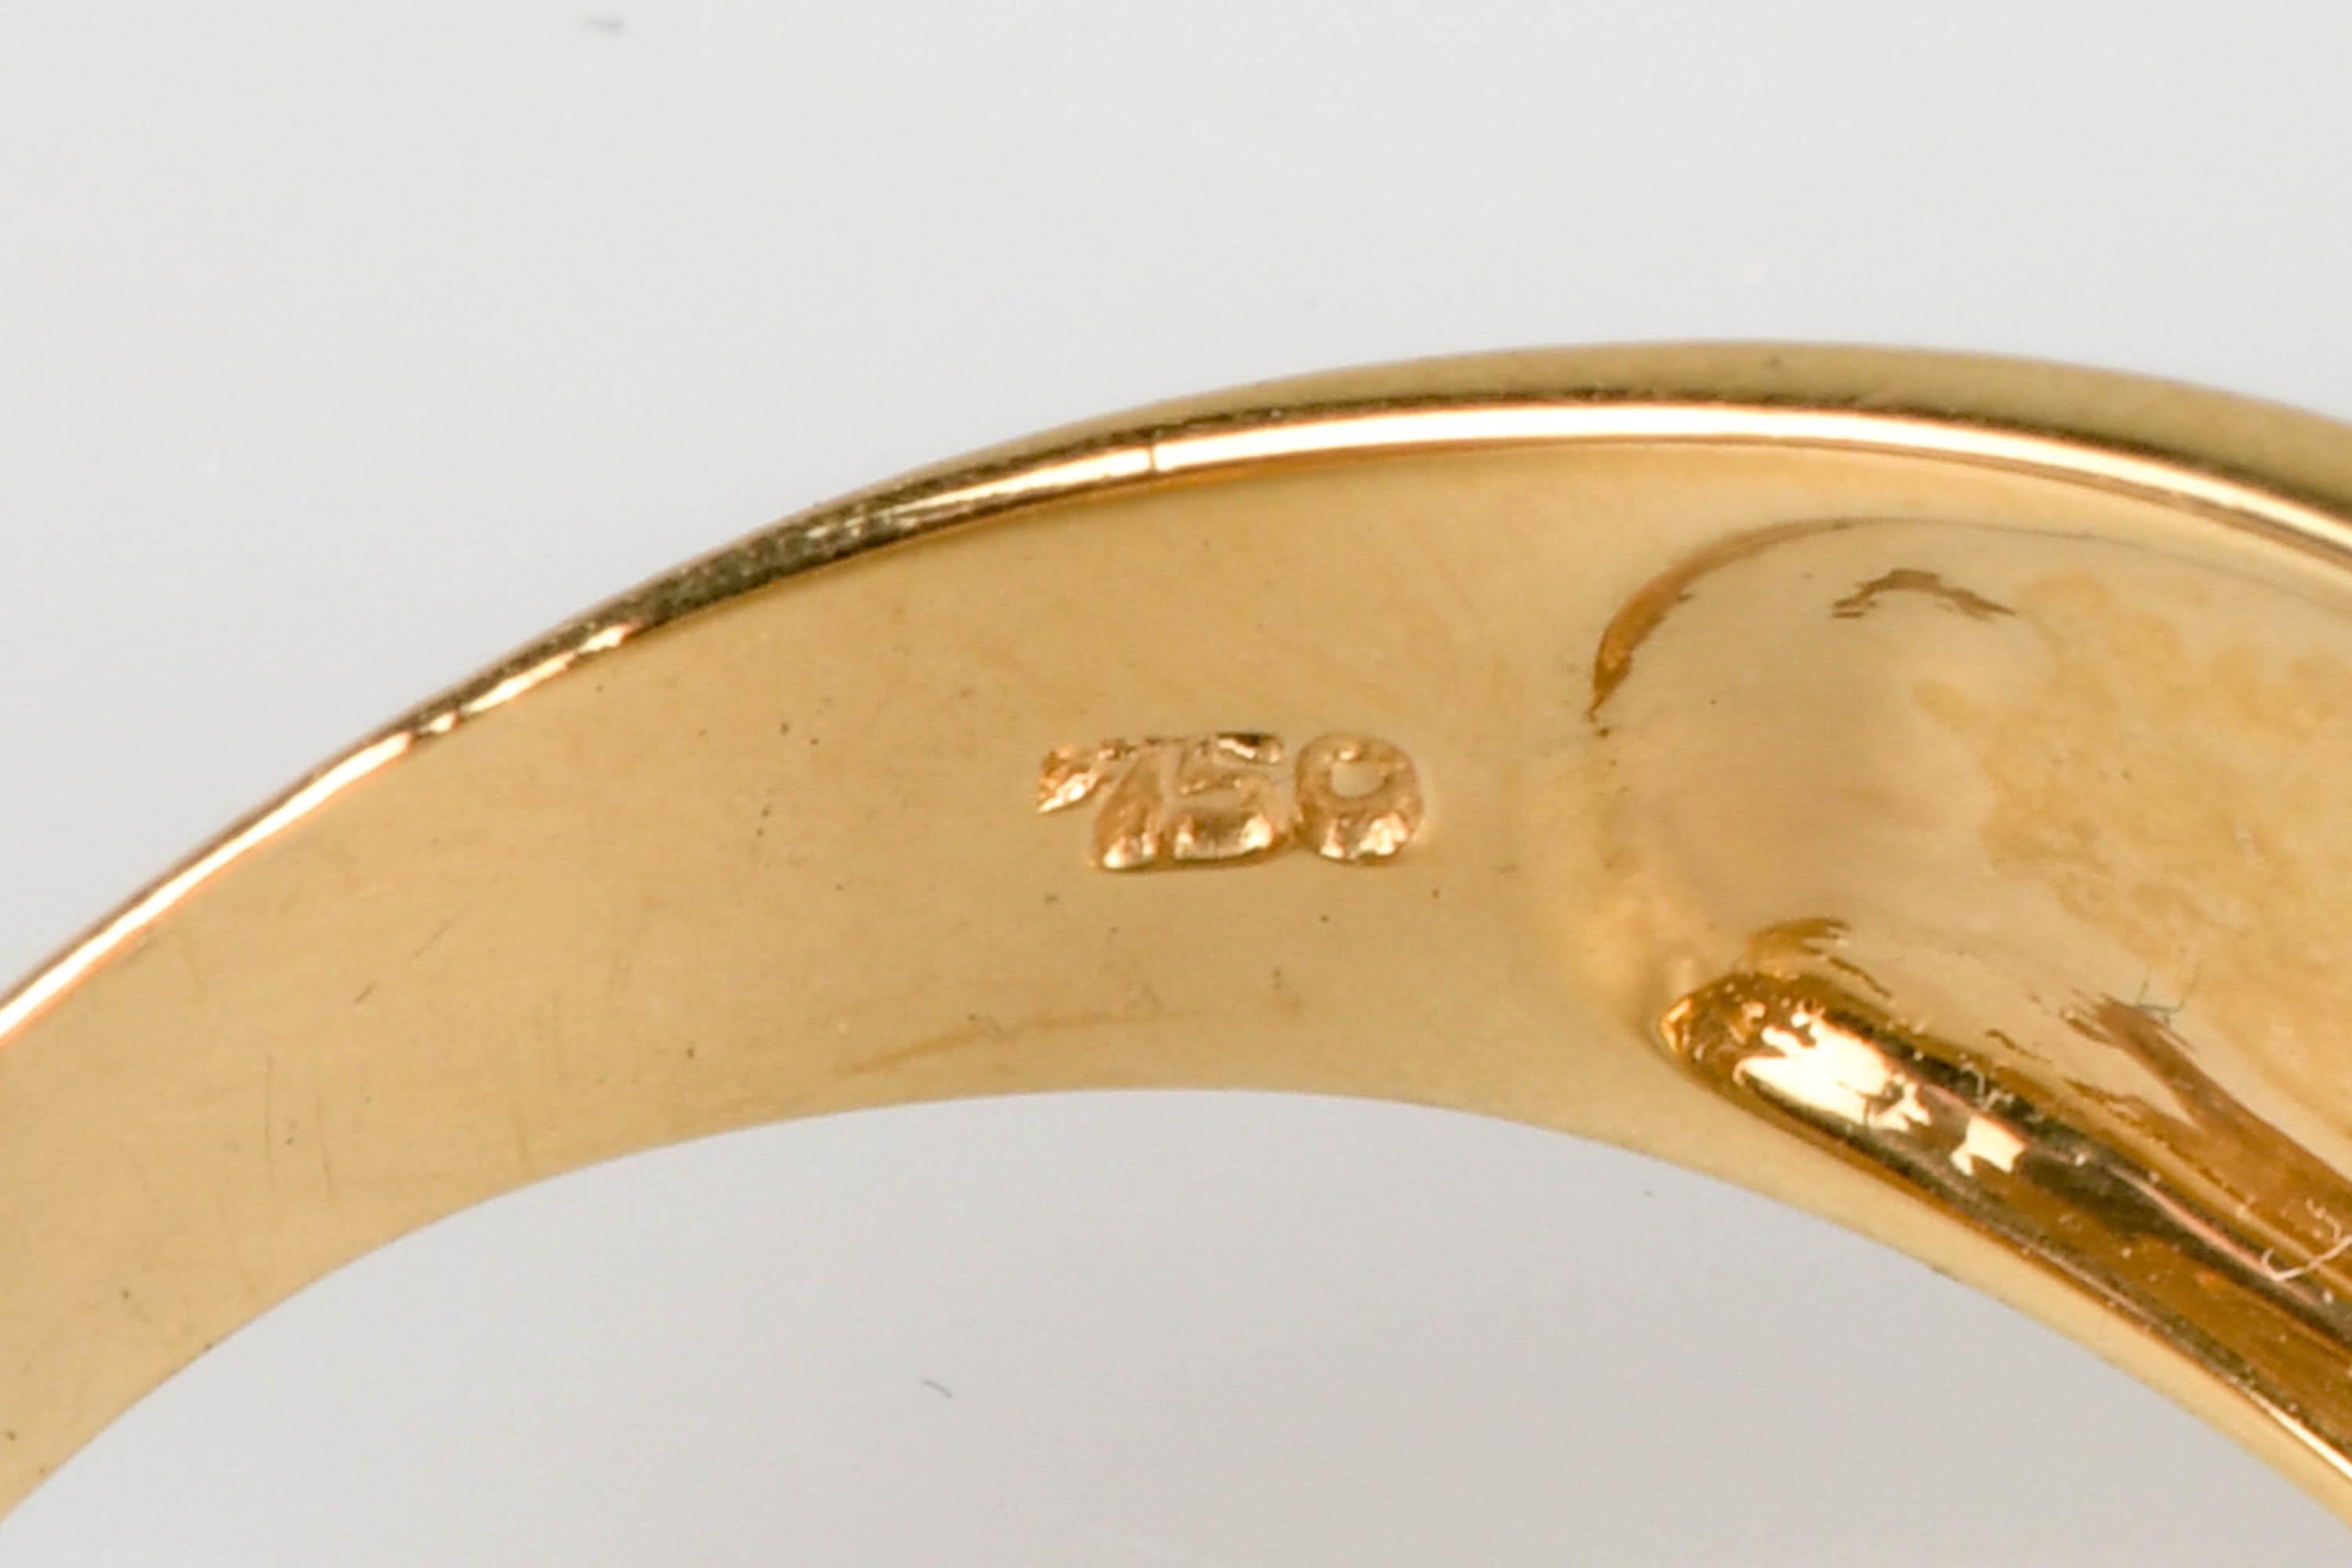 18 carat yellow gold diamonds ring For Sale 2